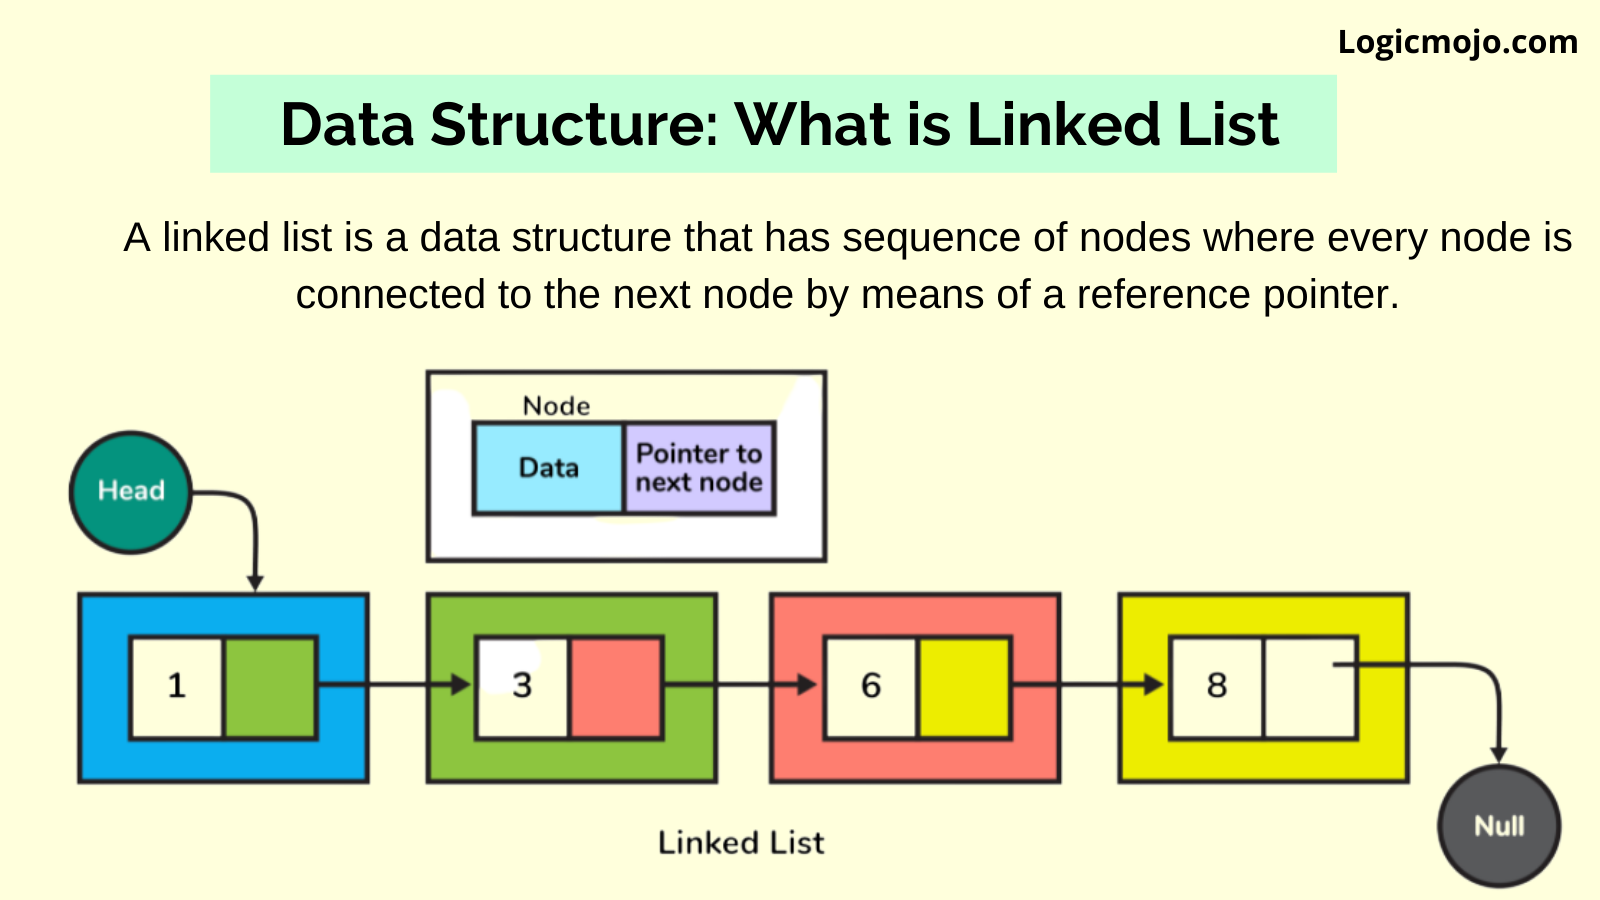 What is a linked list Data Structure?